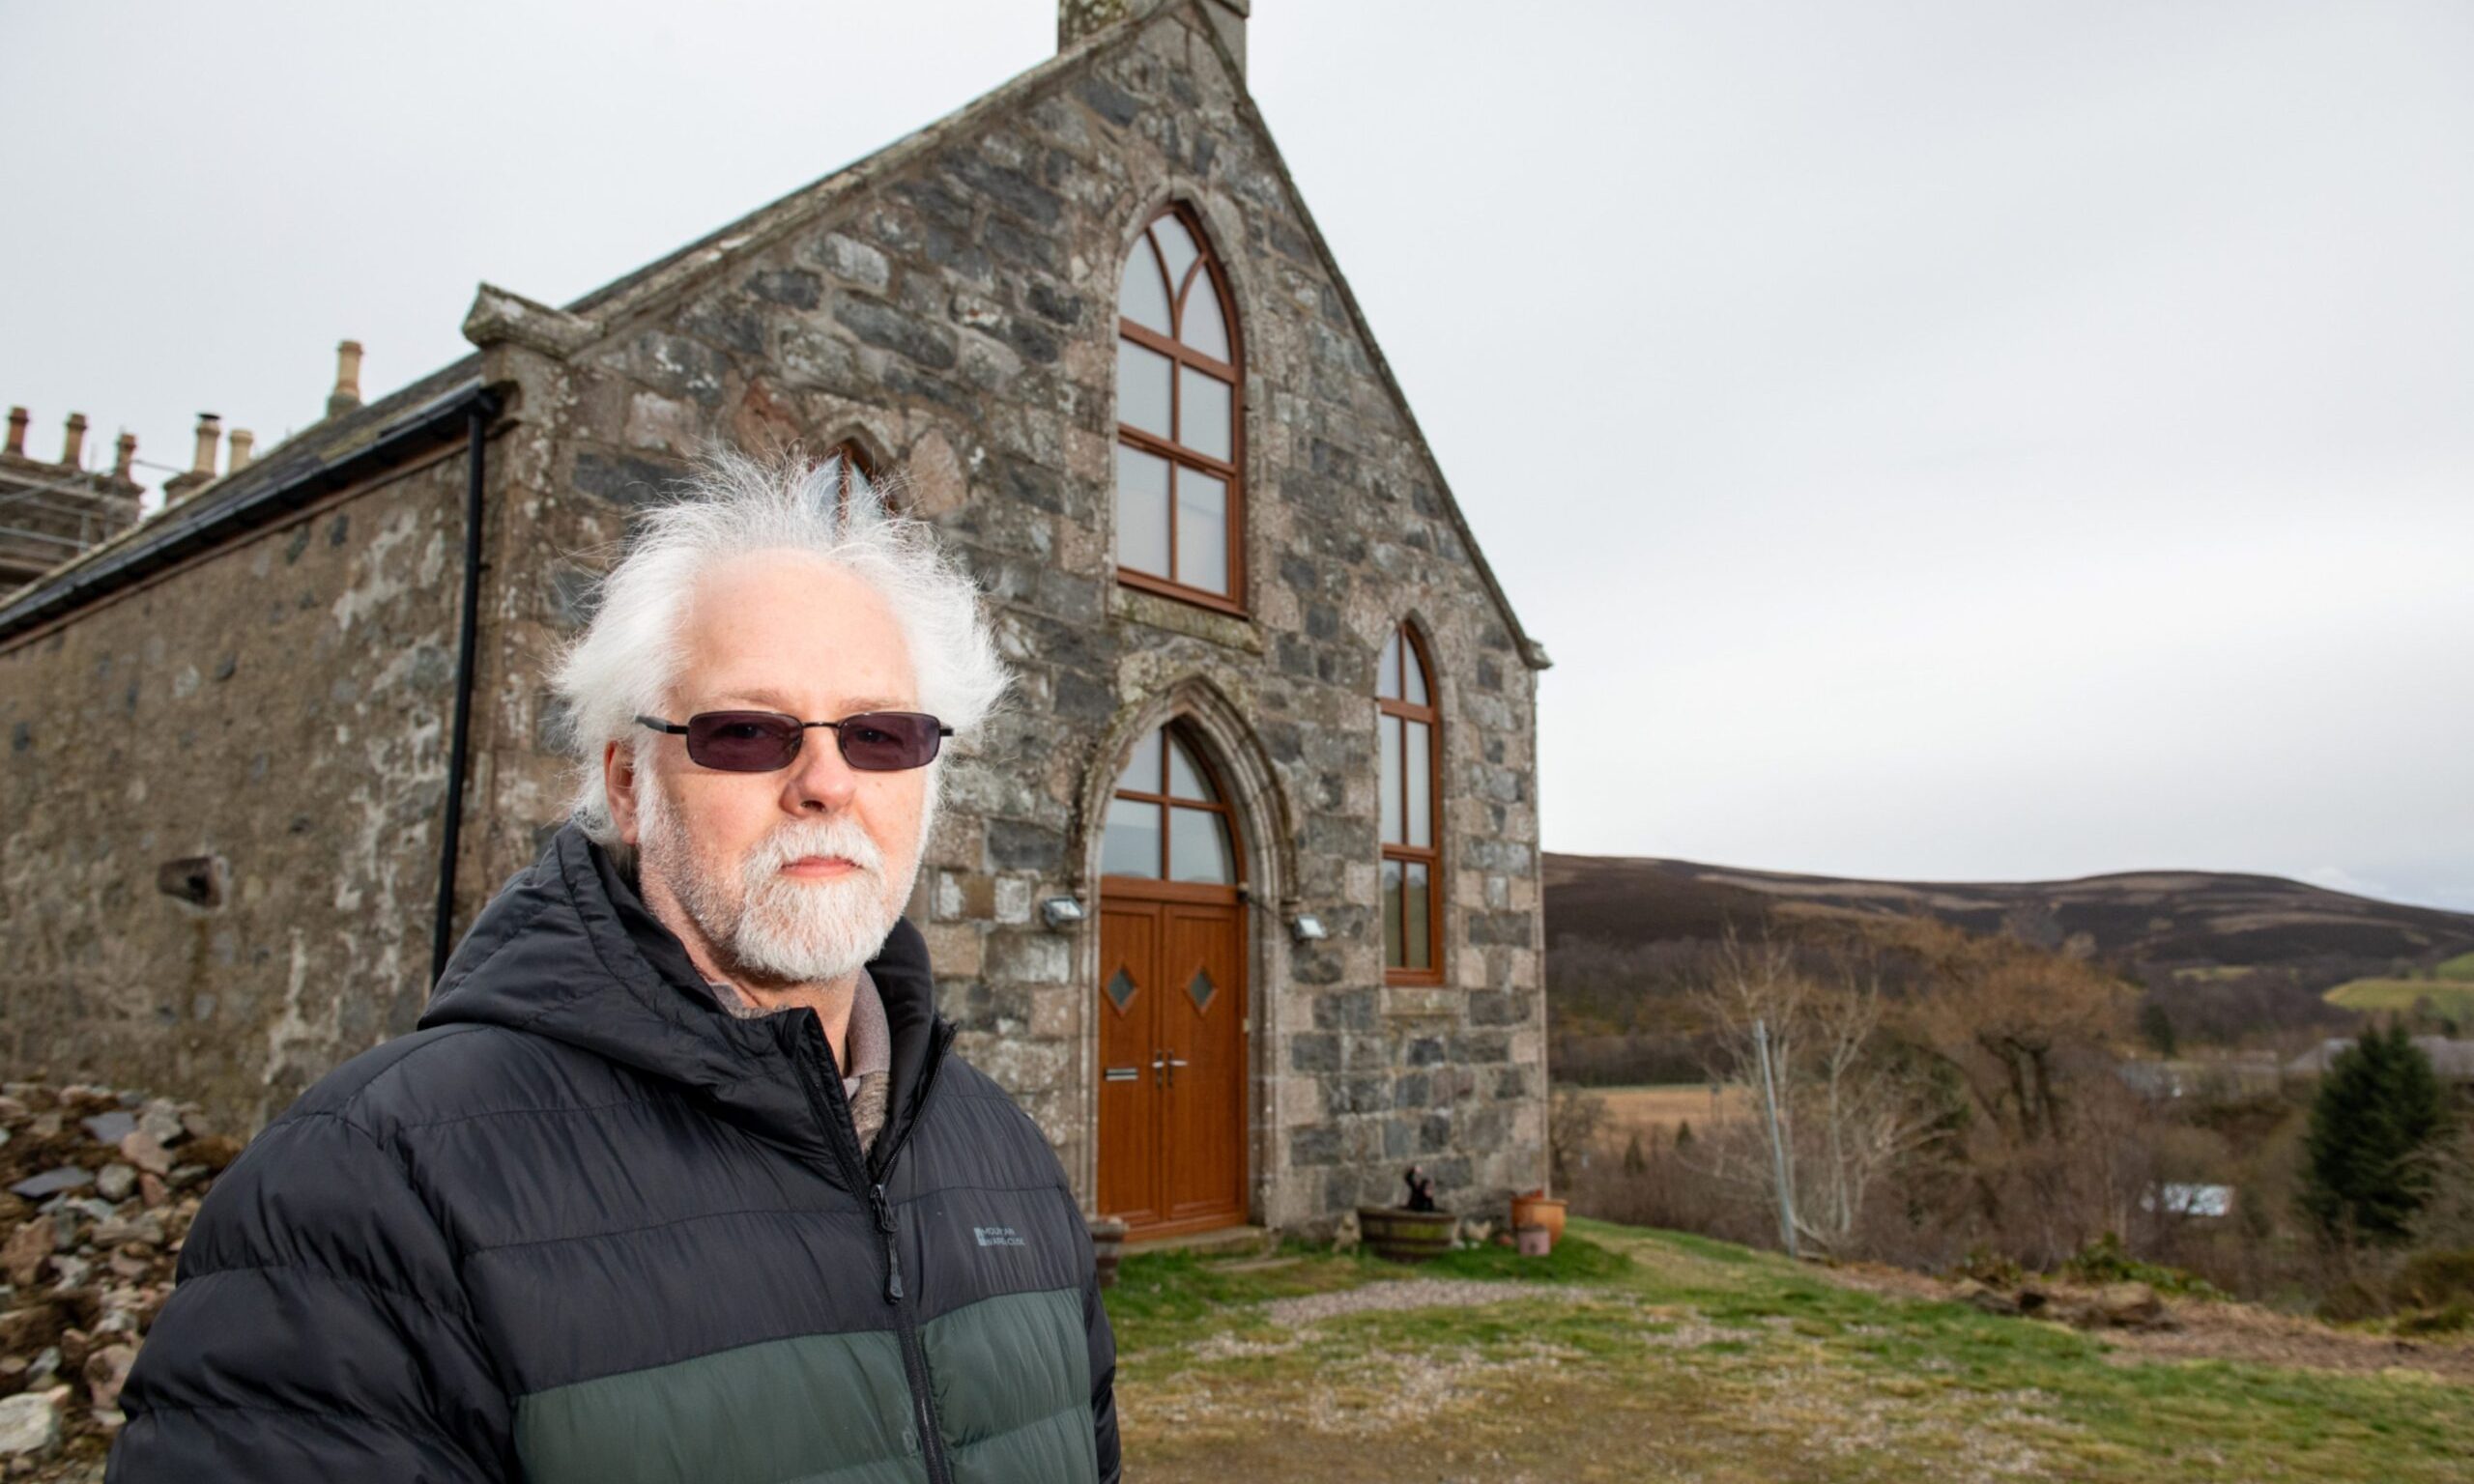 Trevor Smith in front of his former church home.